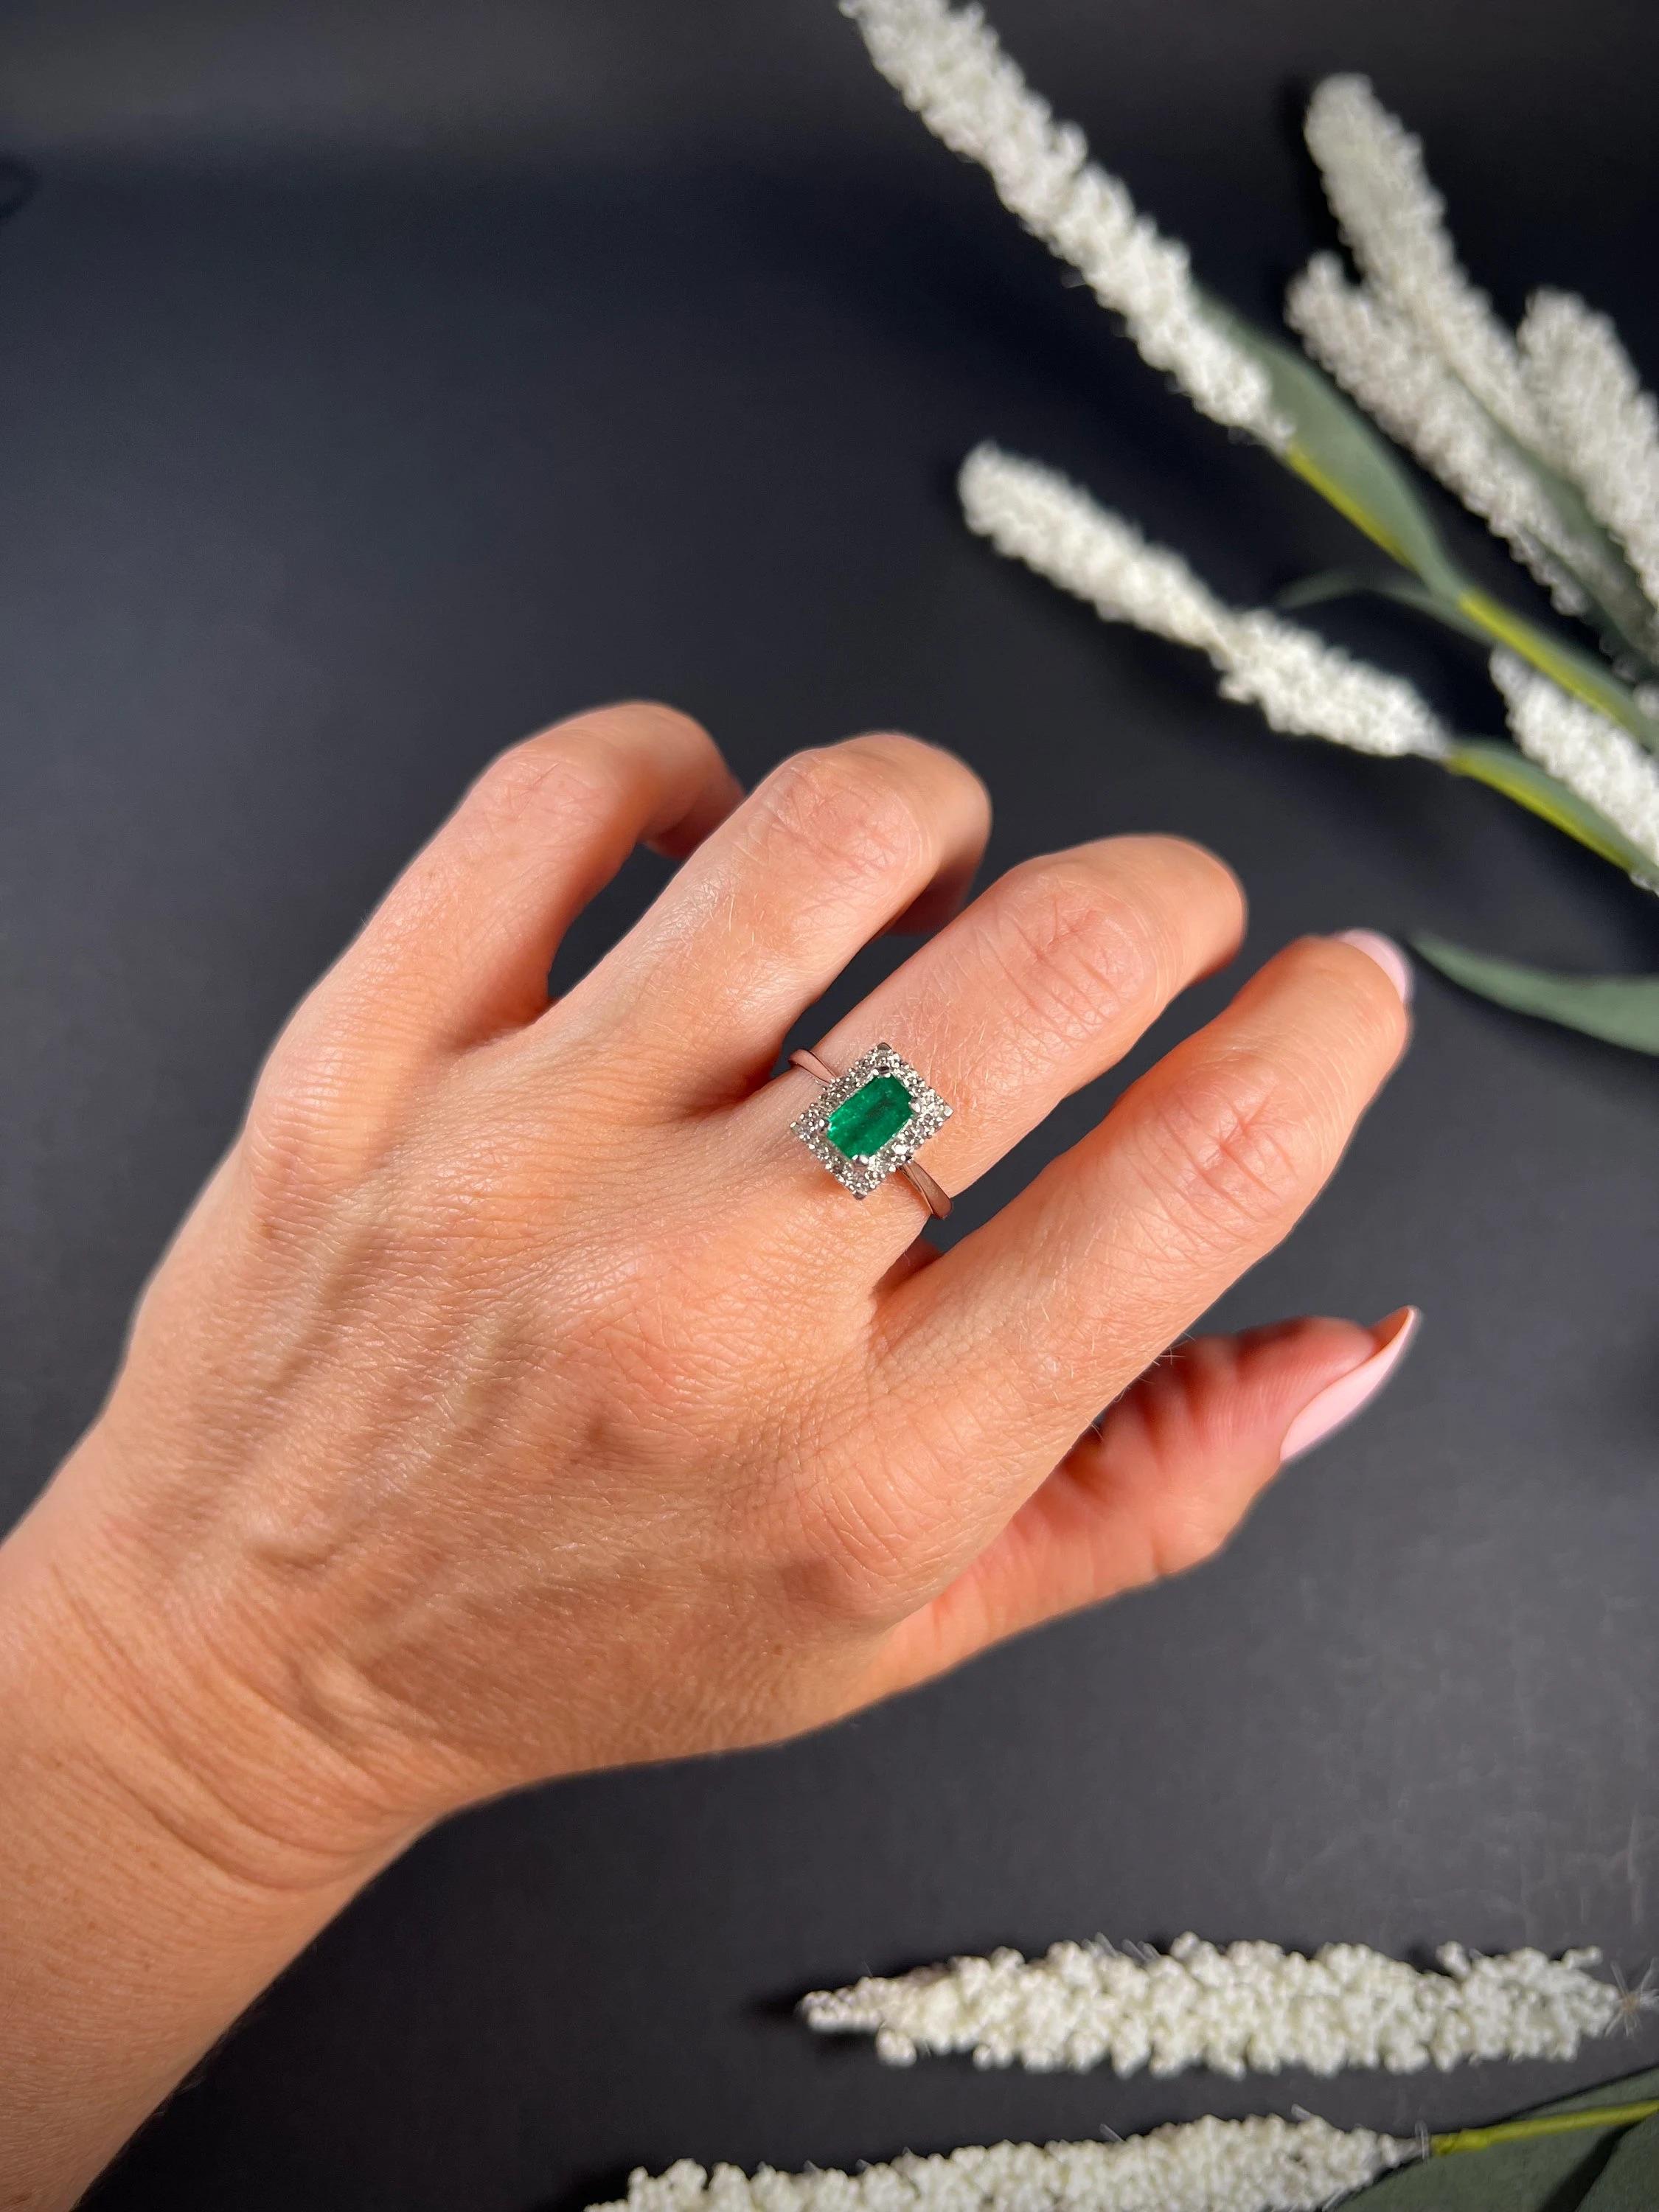 Vintage Emerald Cluster Ring

18ct White Gold Stamped

Circa 1940’s 

Fabulous, rectangular, vintage cluster ring. Set with a gorgeous, emerald cut, natural emerald centre stone & surrounded by a beautiful cluster of natural diamonds. The stones are